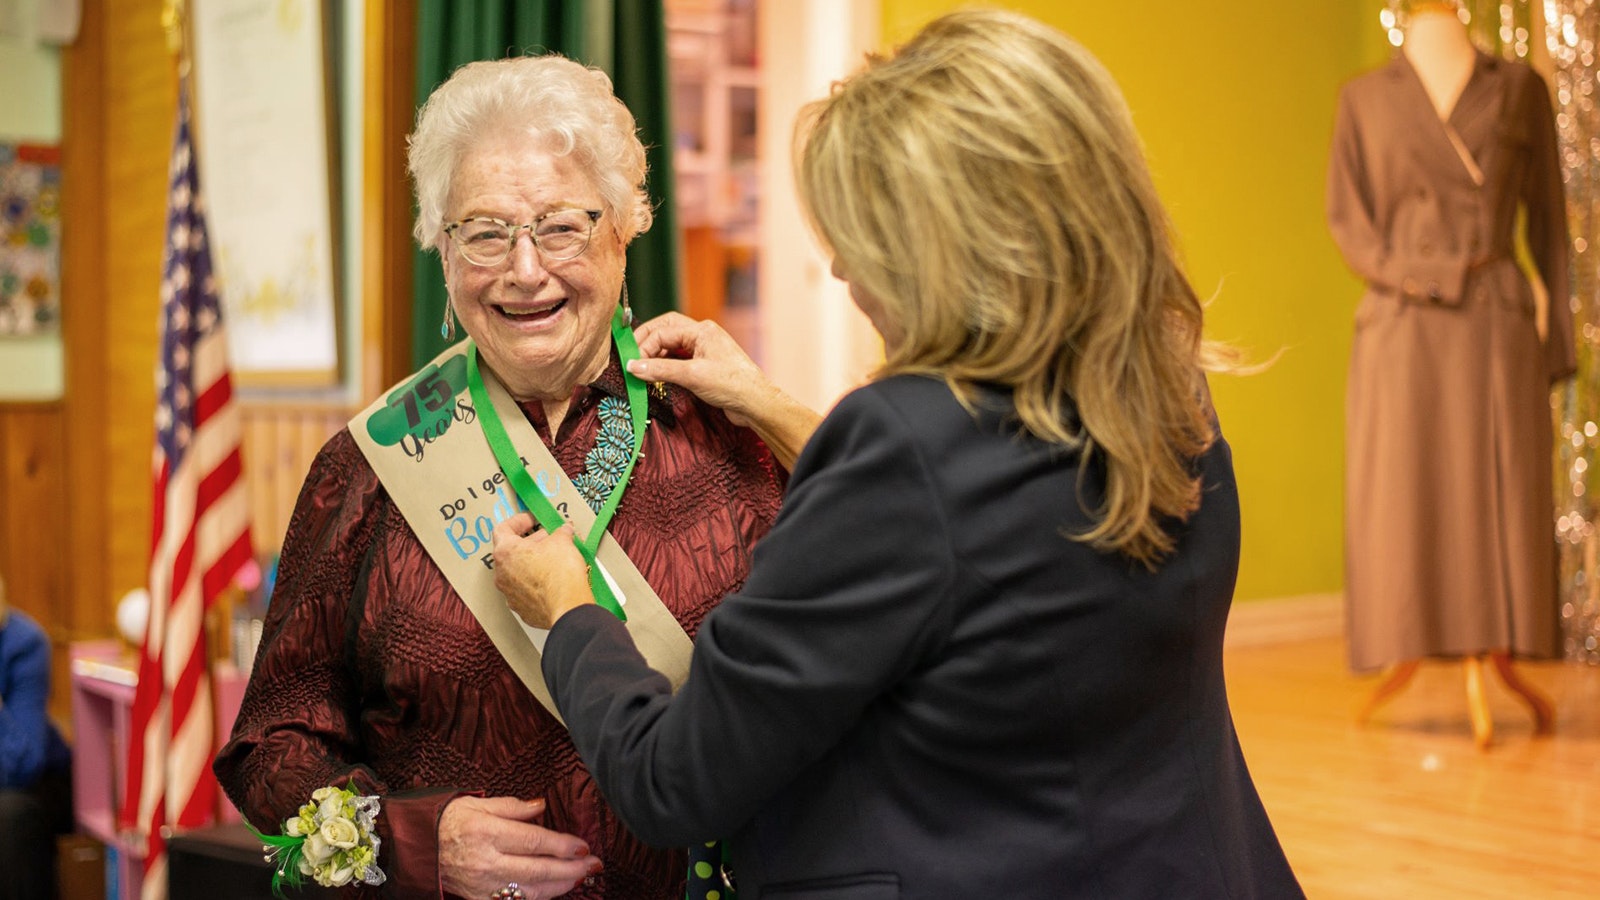 Bettie Marie Daniels receives her 75th year pin from Sally Leep, CEO for the Girl Scouts of Montana and Wyoming, on March 2 in Cody during a celebration for Daniels' many years of service.